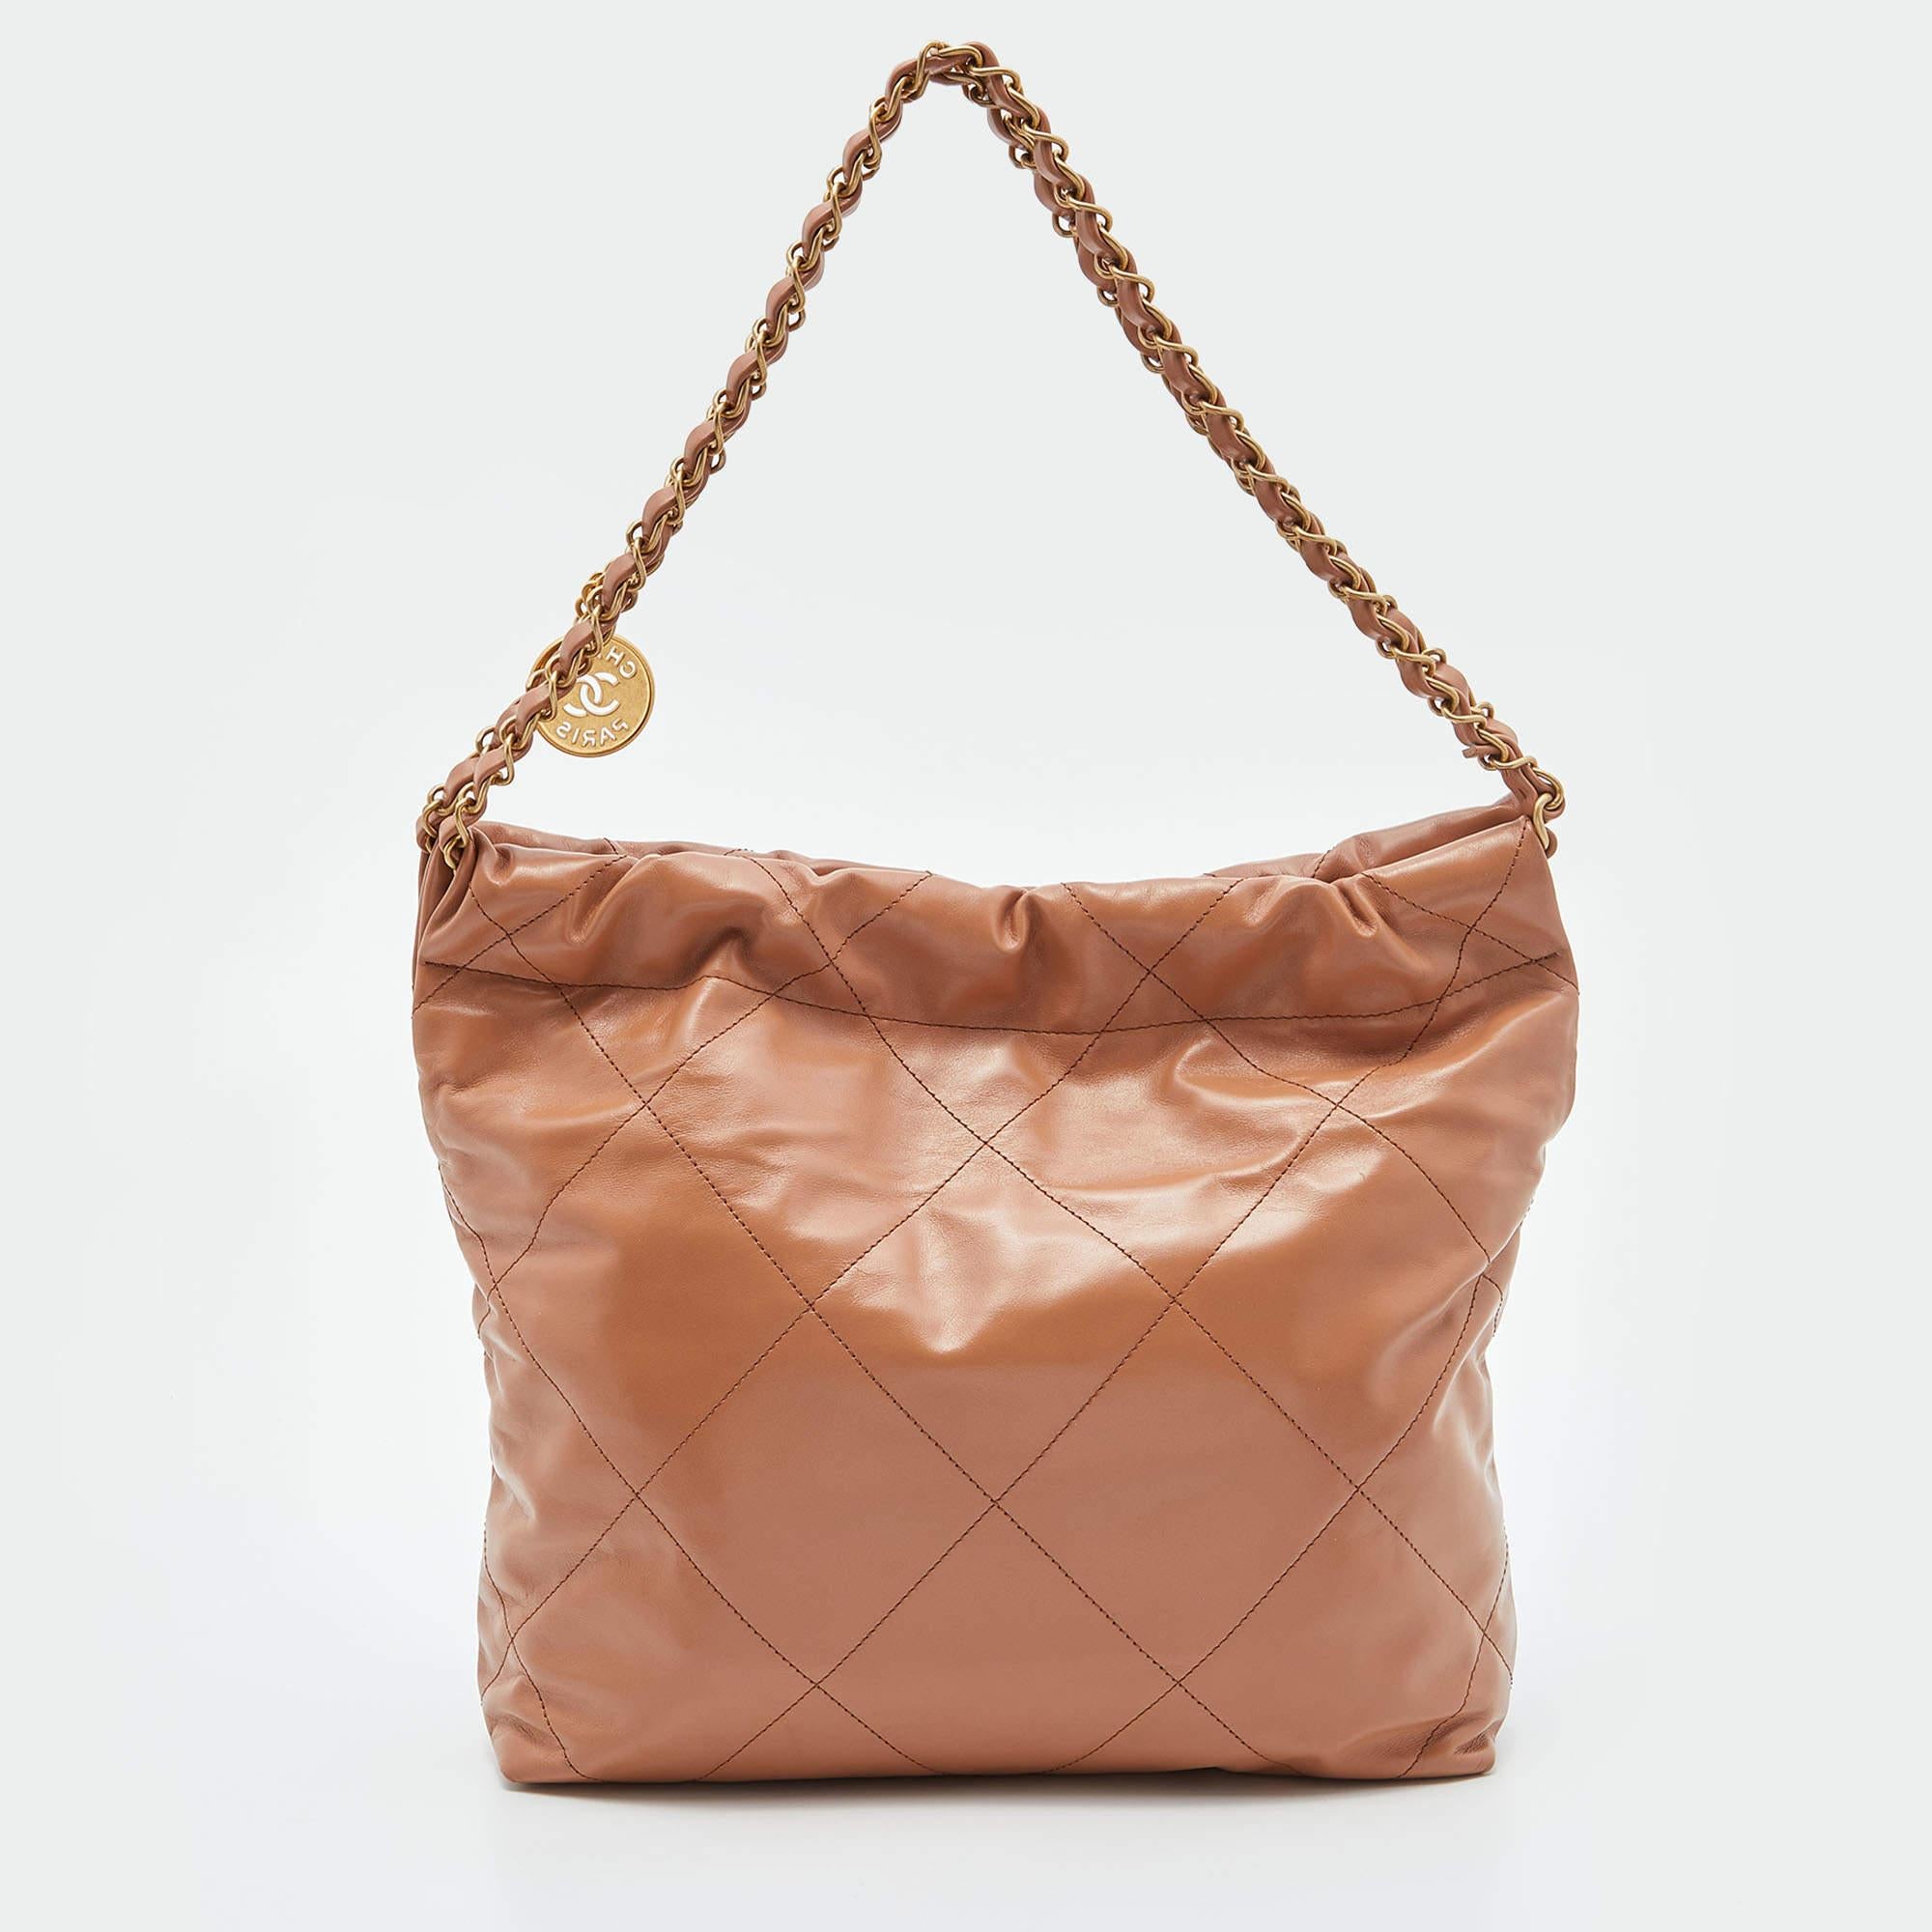 The Chanel 22 bag is a luxurious and chic accessory. Crafted from premium leather with a glossy finish, this drawstring bag features the iconic quilted design synonymous with Chanel. Its compact size and convenient drawstring closure make it a